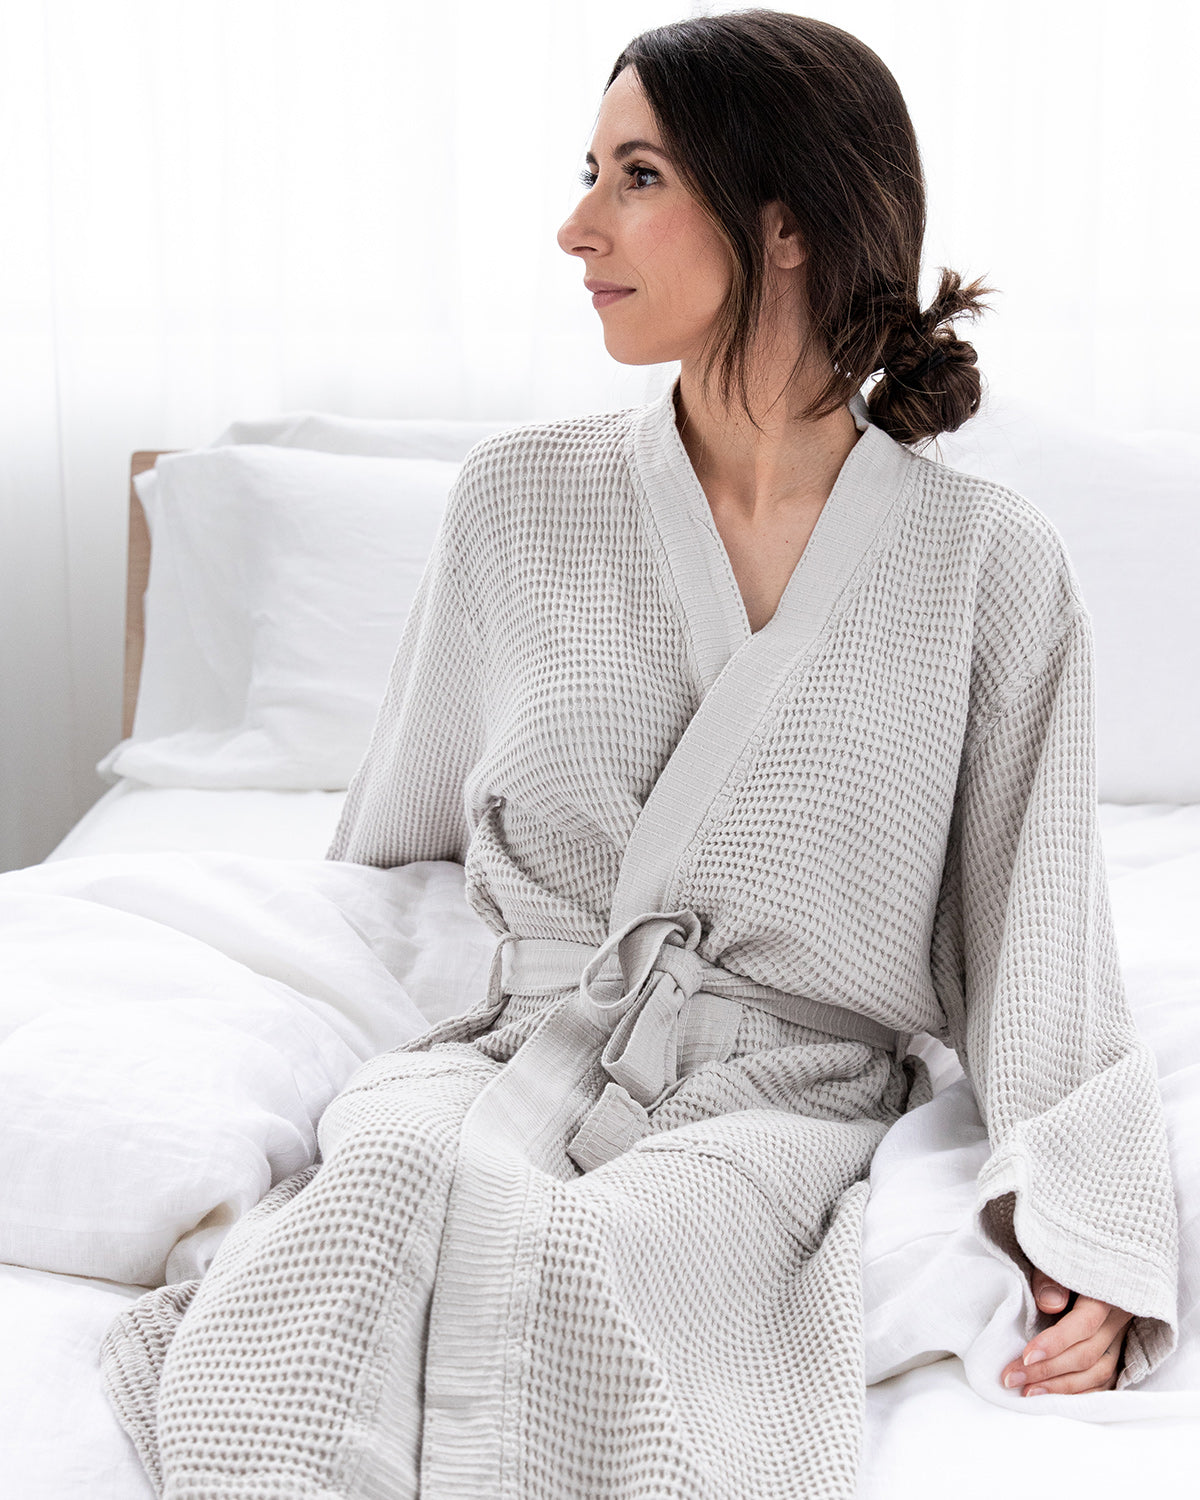 https://cdn.shopify.com/s/files/1/0114/2302/files/Washed-Cotton-Bamboo-Waffle-Robe-Silver1.jpg?v=1706731023